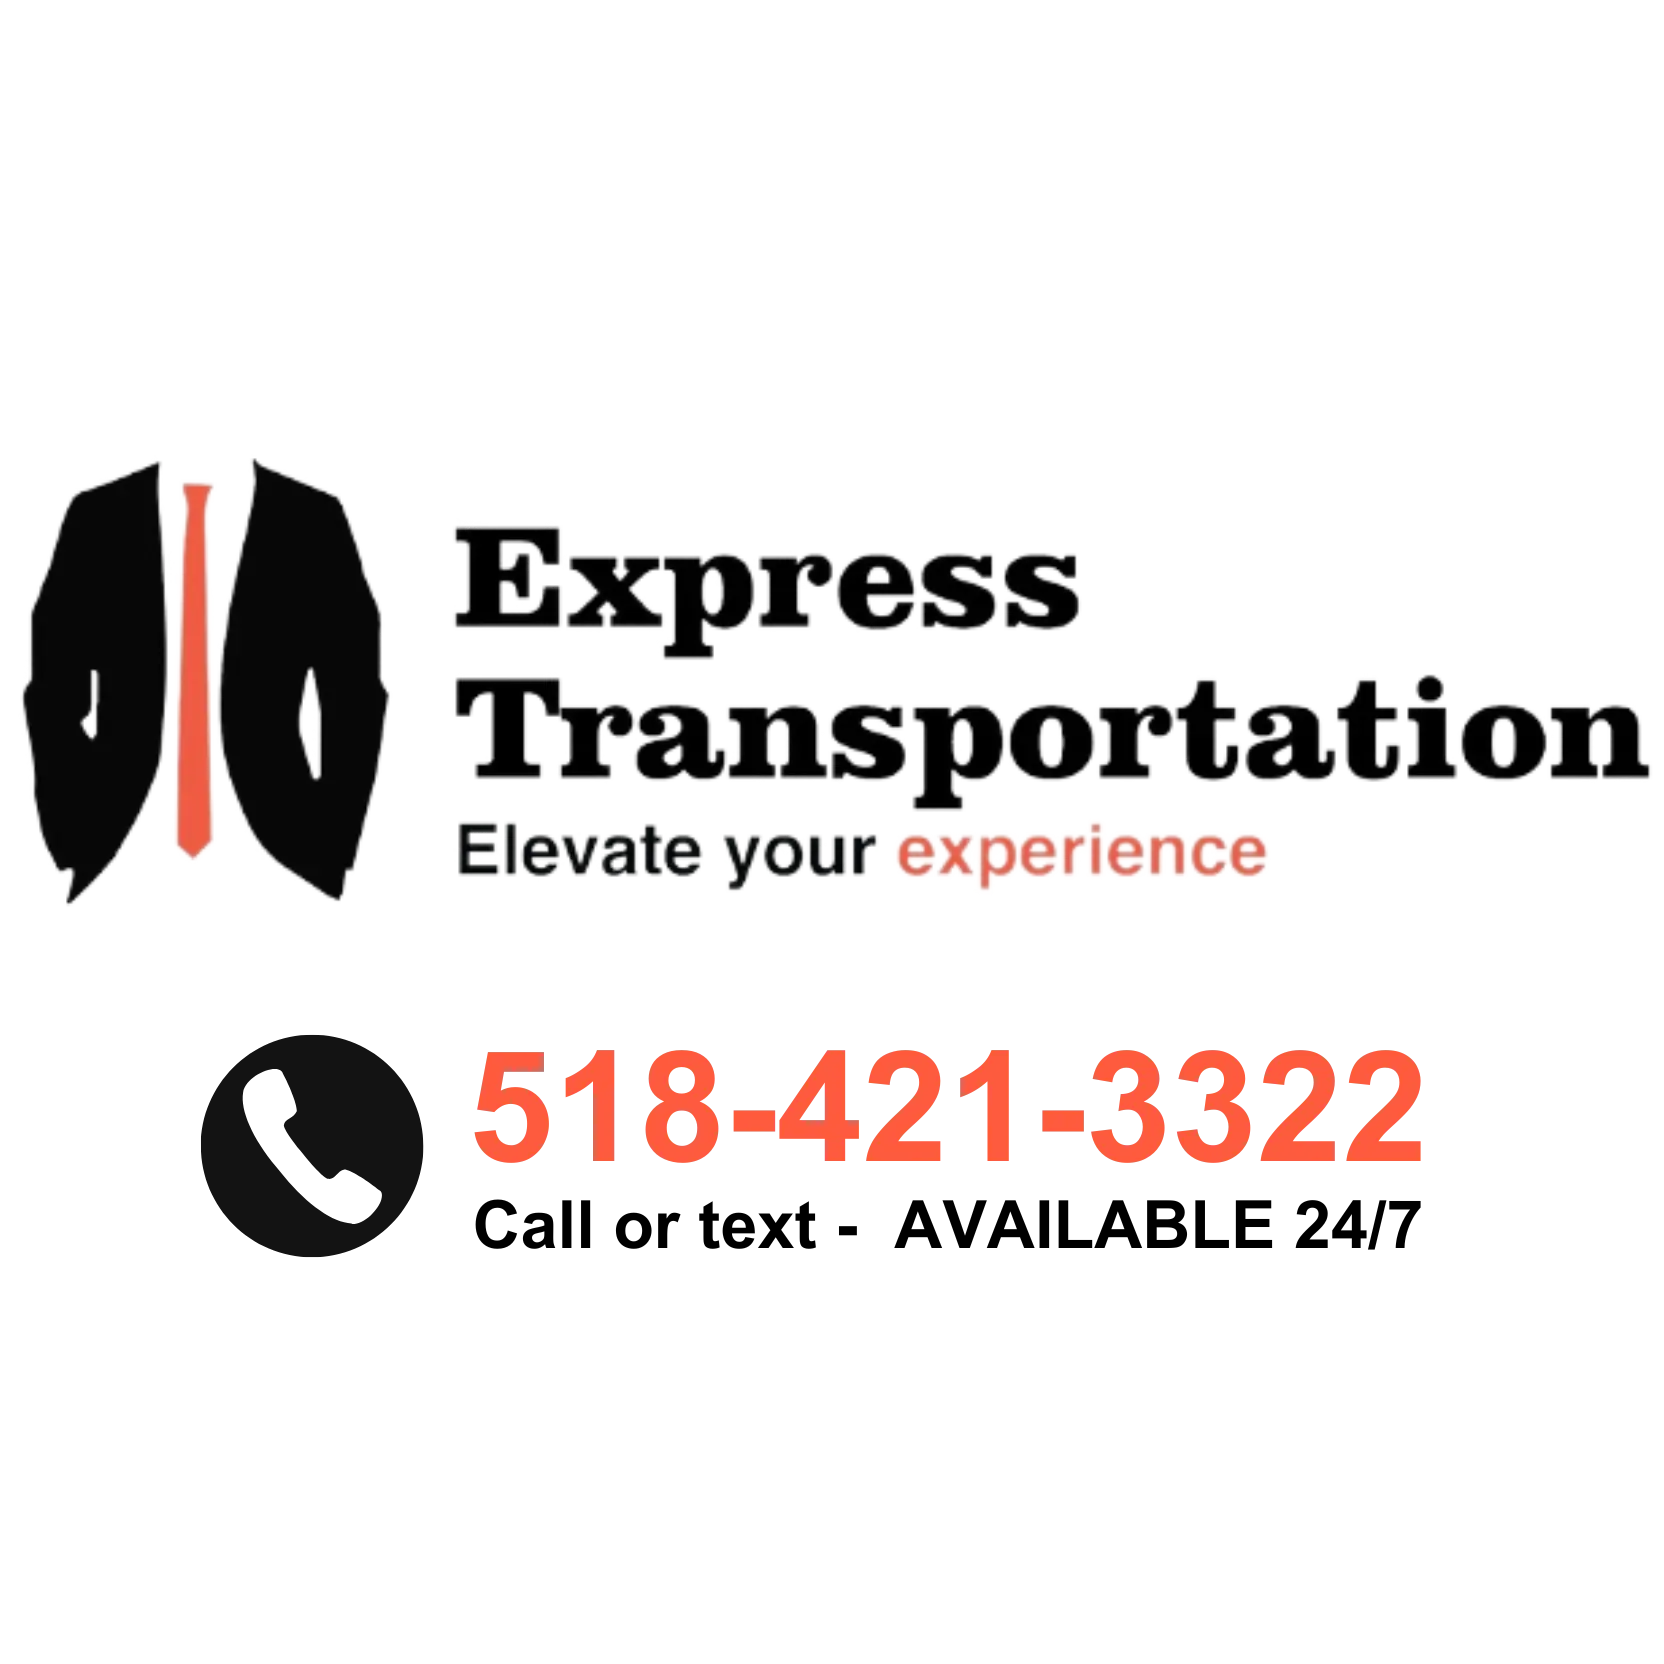 "Express Transportation logo featuring a sleek design with bold typography. Below the logo, the phone number is displayed prominently, with the text 'Open 24/7' indicating round-the-clock availability."